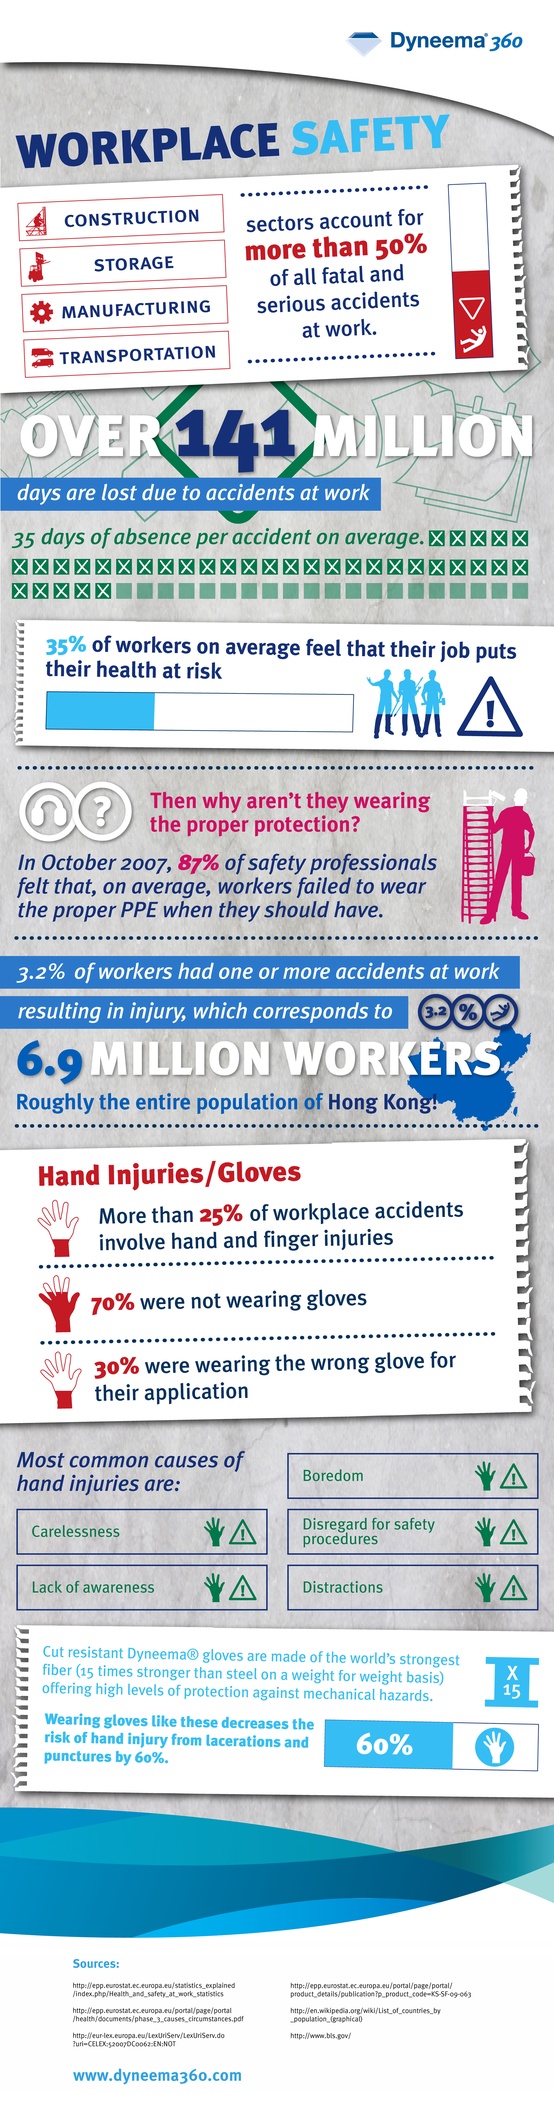 Workplace Safety Infographic